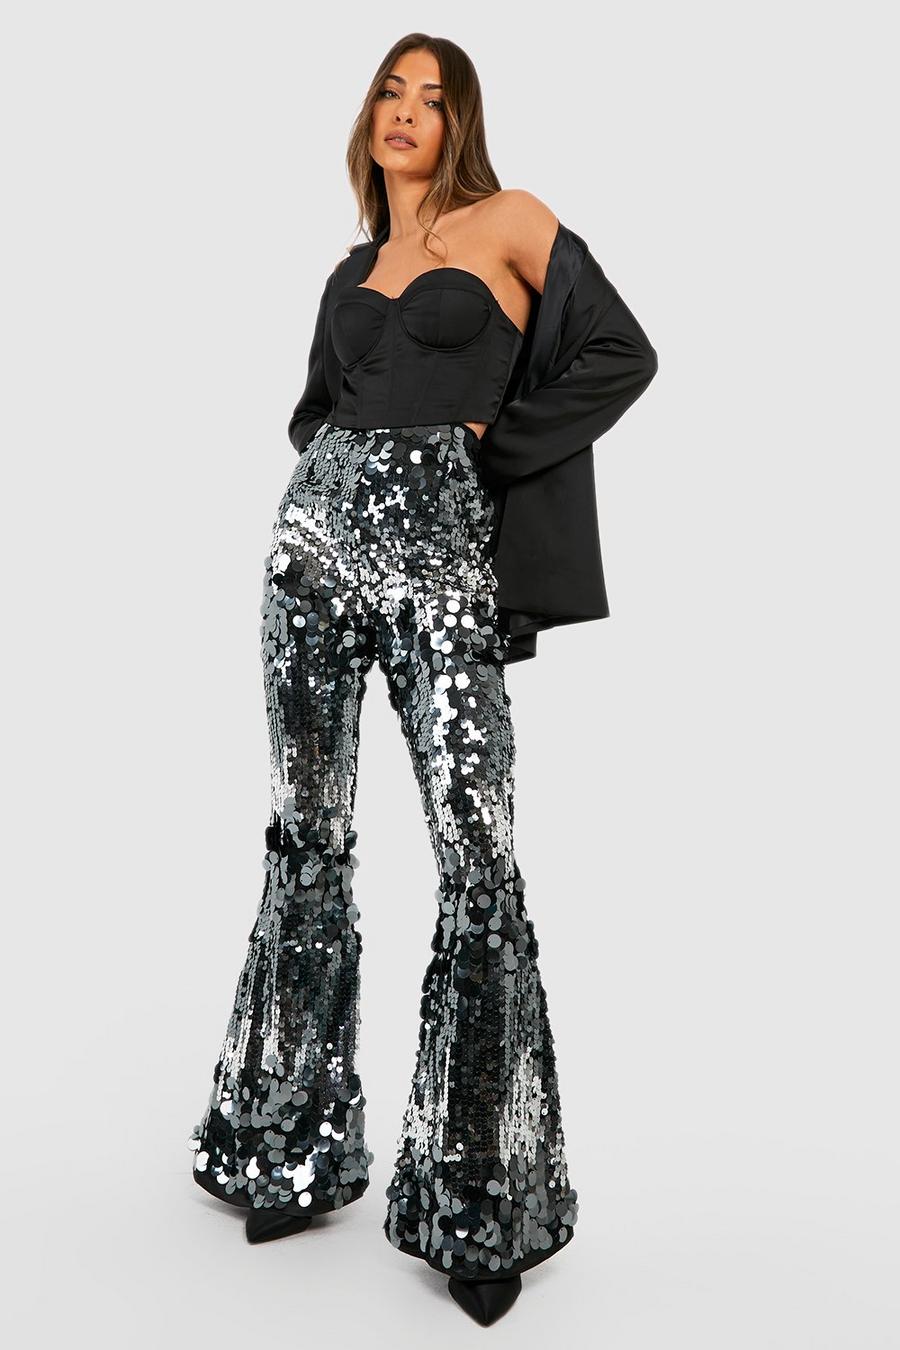 Silver Disc Sequin Flares